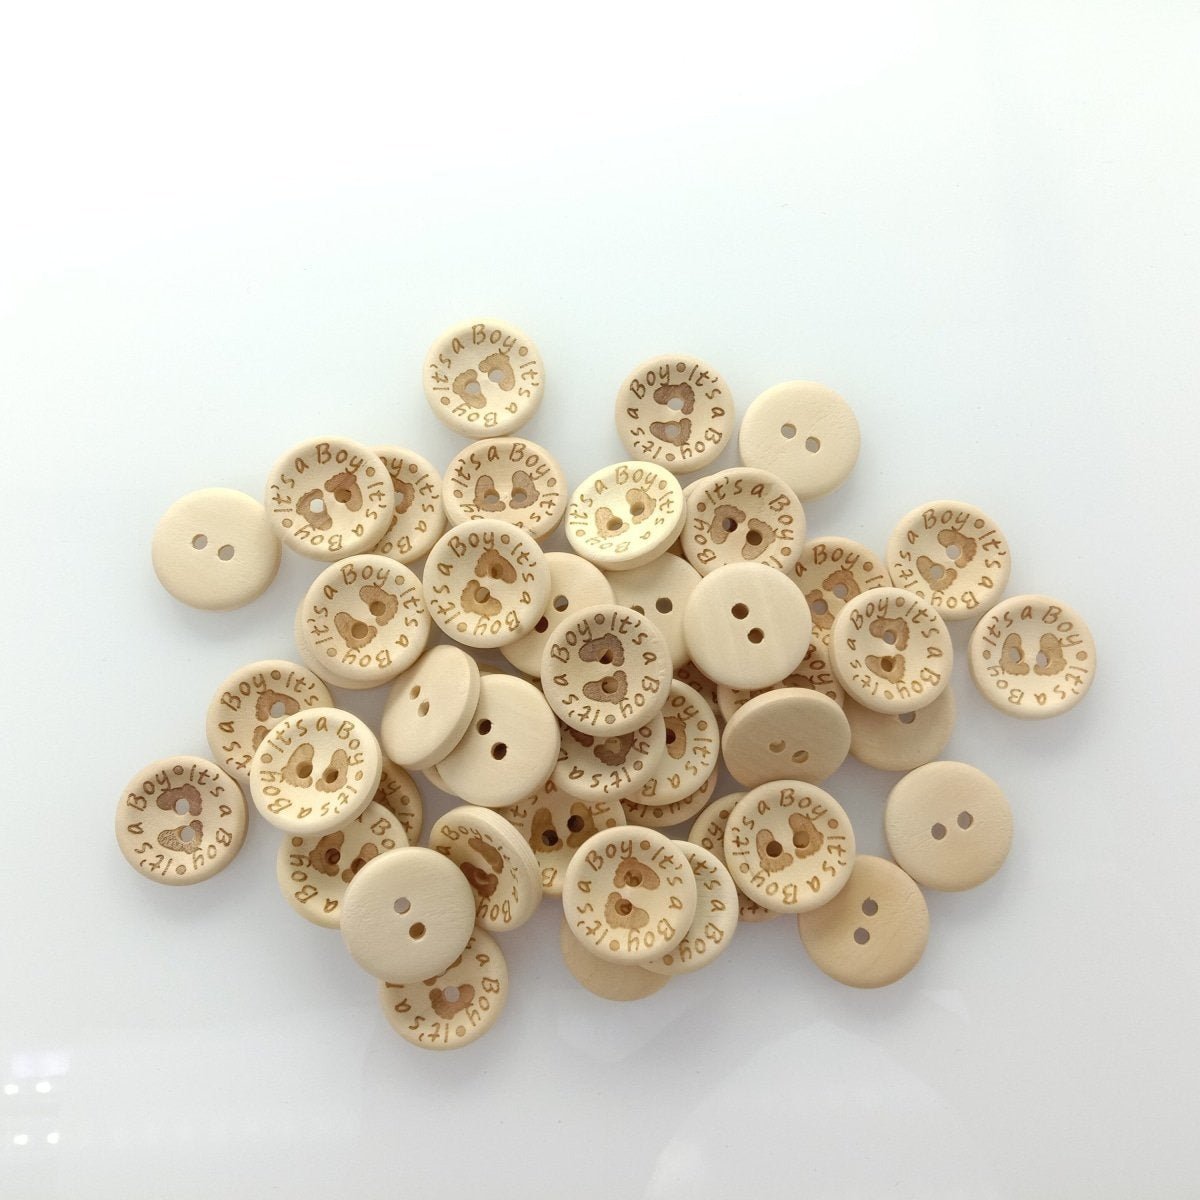 15/20/25mm It's a Girl/Boy Wooden Button Natural Wood Sewing Baby Clothing Buttons - It's a Boy 20mm 50pcs - - Asia Sell